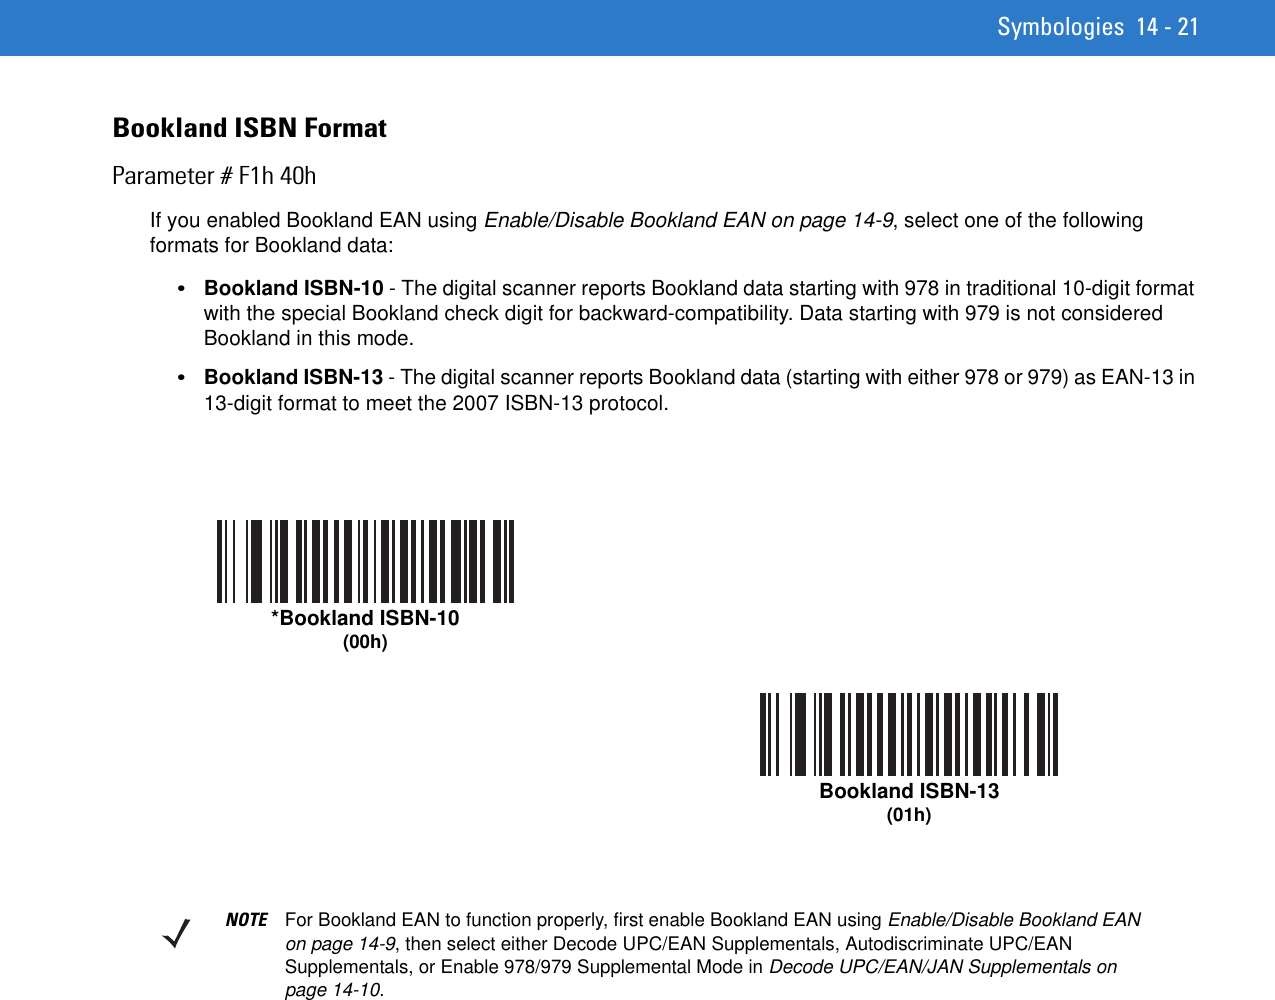 Symbologies 14 - 21Bookland ISBN FormatParameter # F1h 40hIf you enabled Bookland EAN using Enable/Disable Bookland EAN on page 14-9, select one of the following formats for Bookland data: •Bookland ISBN-10 - The digital scanner reports Bookland data starting with 978 in traditional 10-digit format with the special Bookland check digit for backward-compatibility. Data starting with 979 is not considered Bookland in this mode.•Bookland ISBN-13 - The digital scanner reports Bookland data (starting with either 978 or 979) as EAN-13 in 13-digit format to meet the 2007 ISBN-13 protocol.*Bookland ISBN-10(00h)Bookland ISBN-13(01h)NOTE For Bookland EAN to function properly, first enable Bookland EAN using Enable/Disable Bookland EAN on page 14-9, then select either Decode UPC/EAN Supplementals, Autodiscriminate UPC/EAN Supplementals, or Enable 978/979 Supplemental Mode in Decode UPC/EAN/JAN Supplementals on page 14-10.